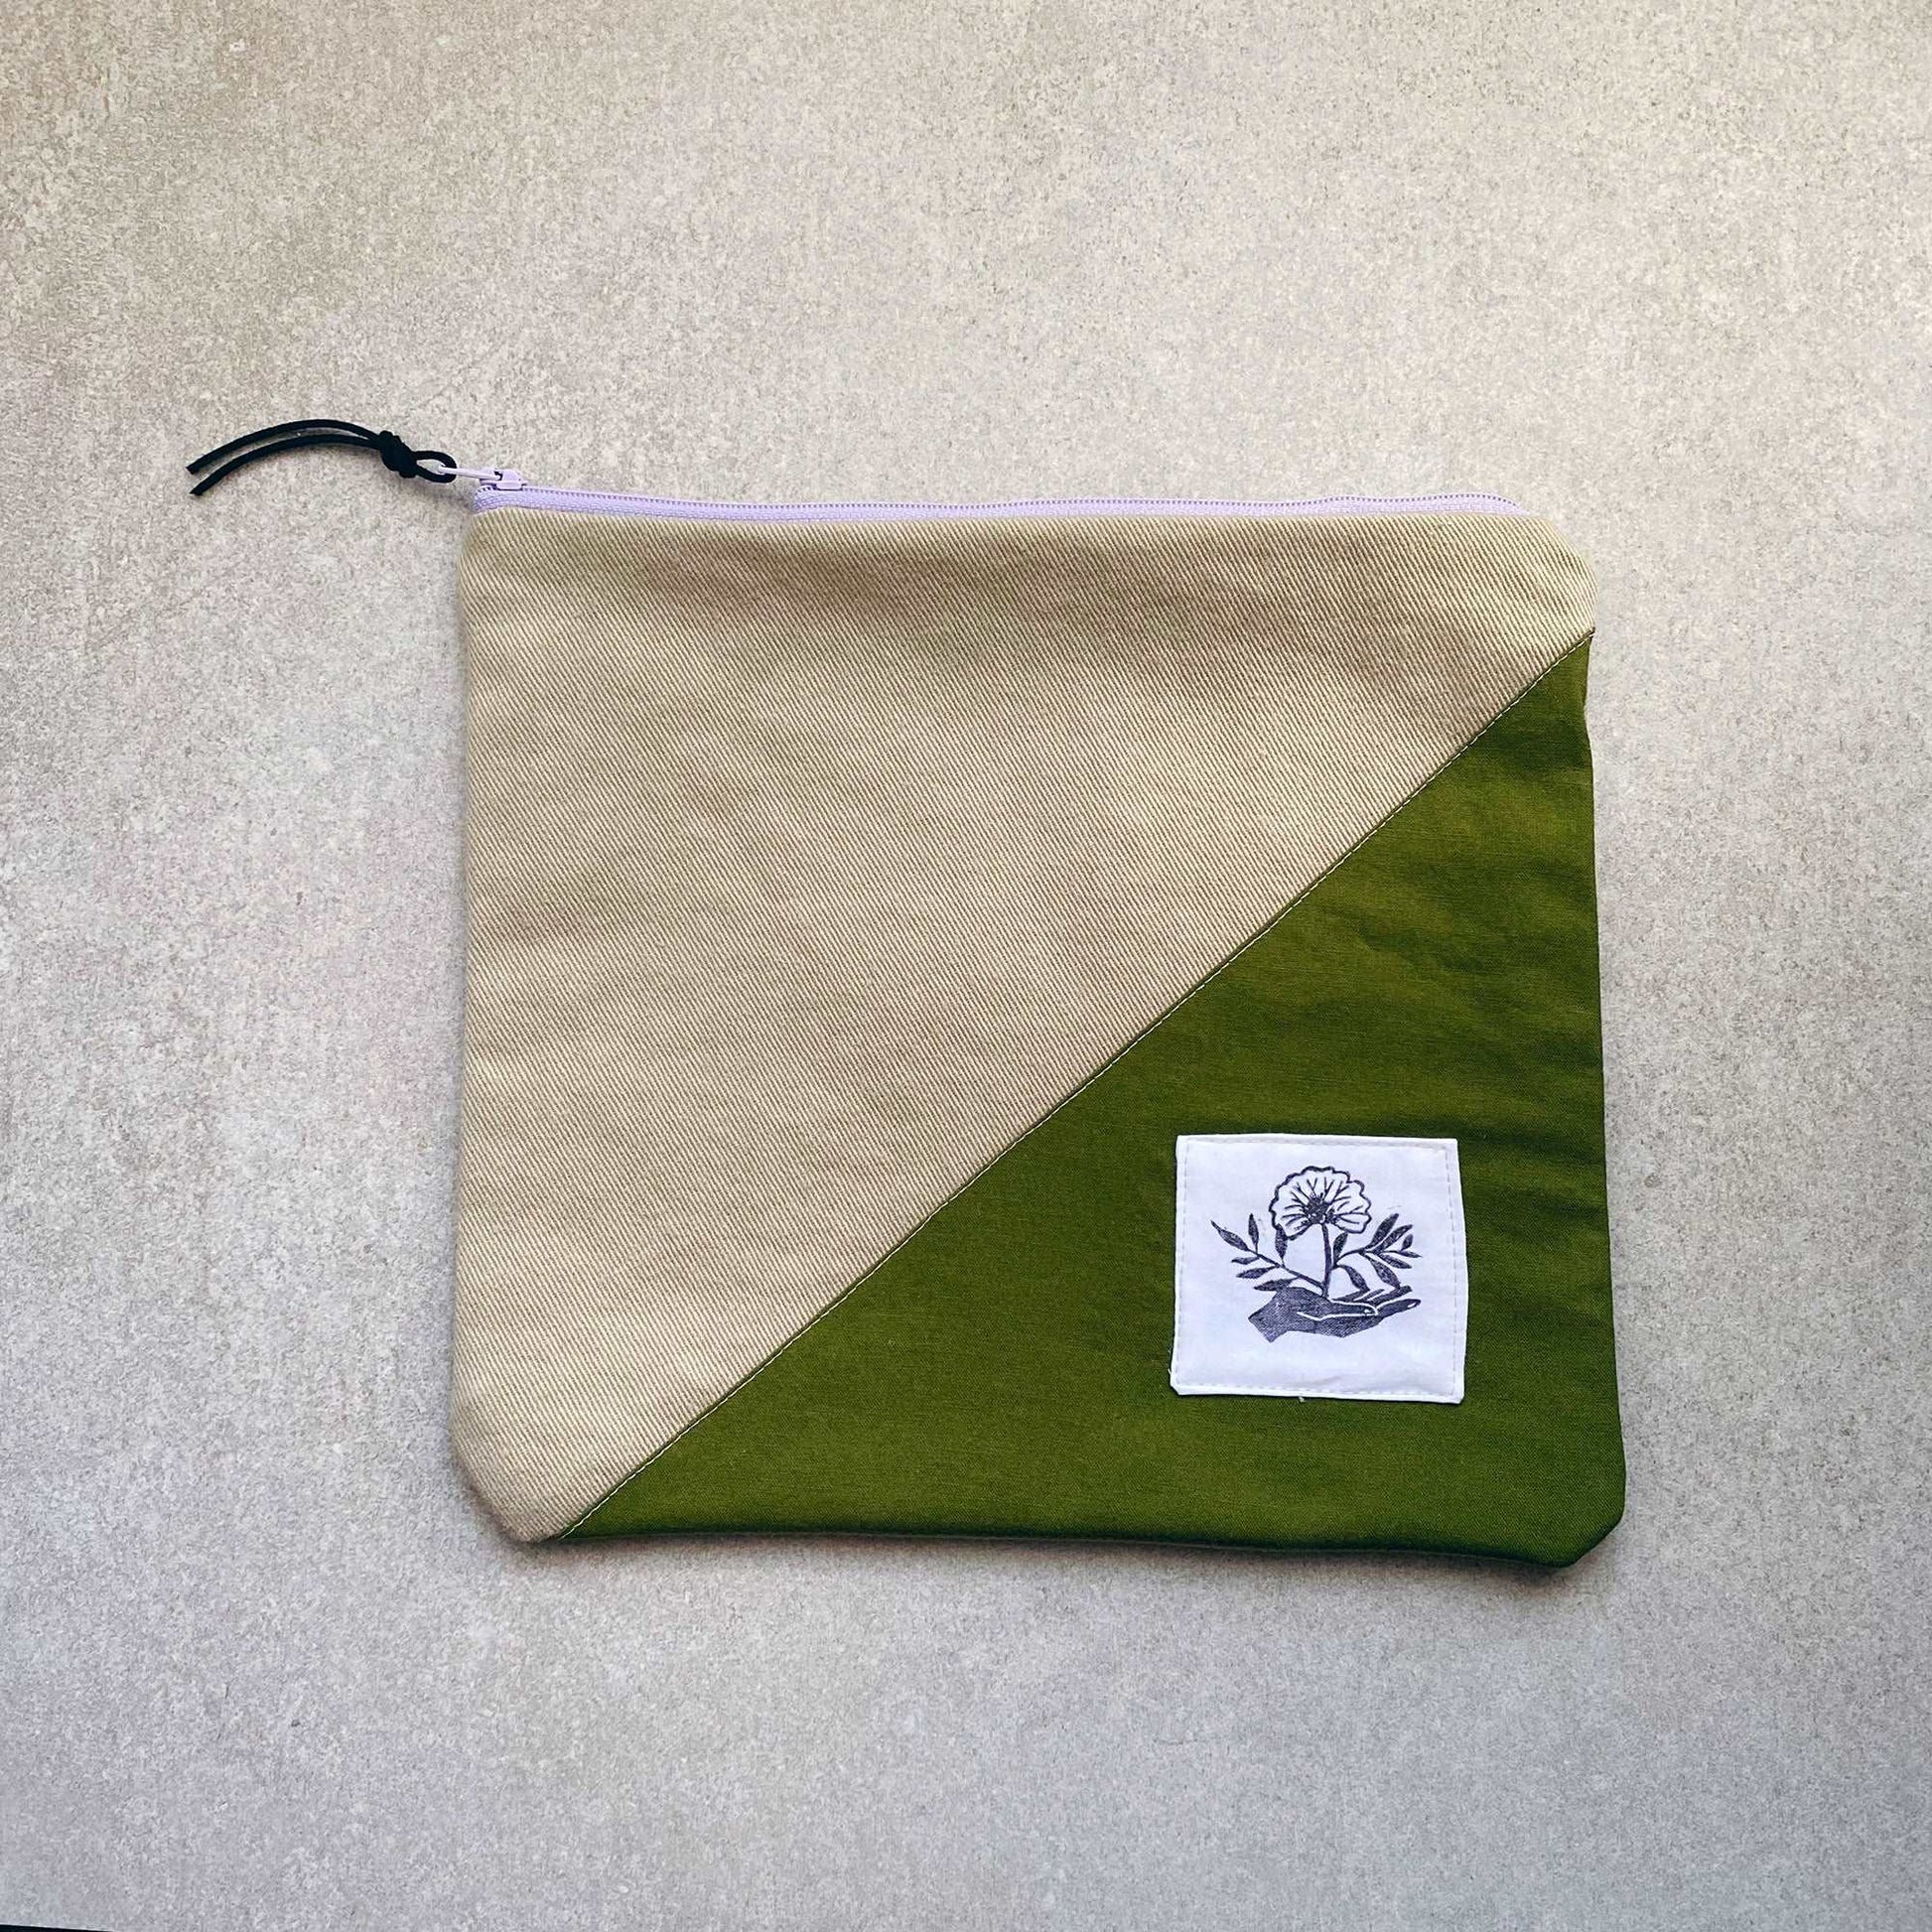 This is a photo of a large canvas zipper pouch with an olive green fabric panel. It is laying on a light gray background.